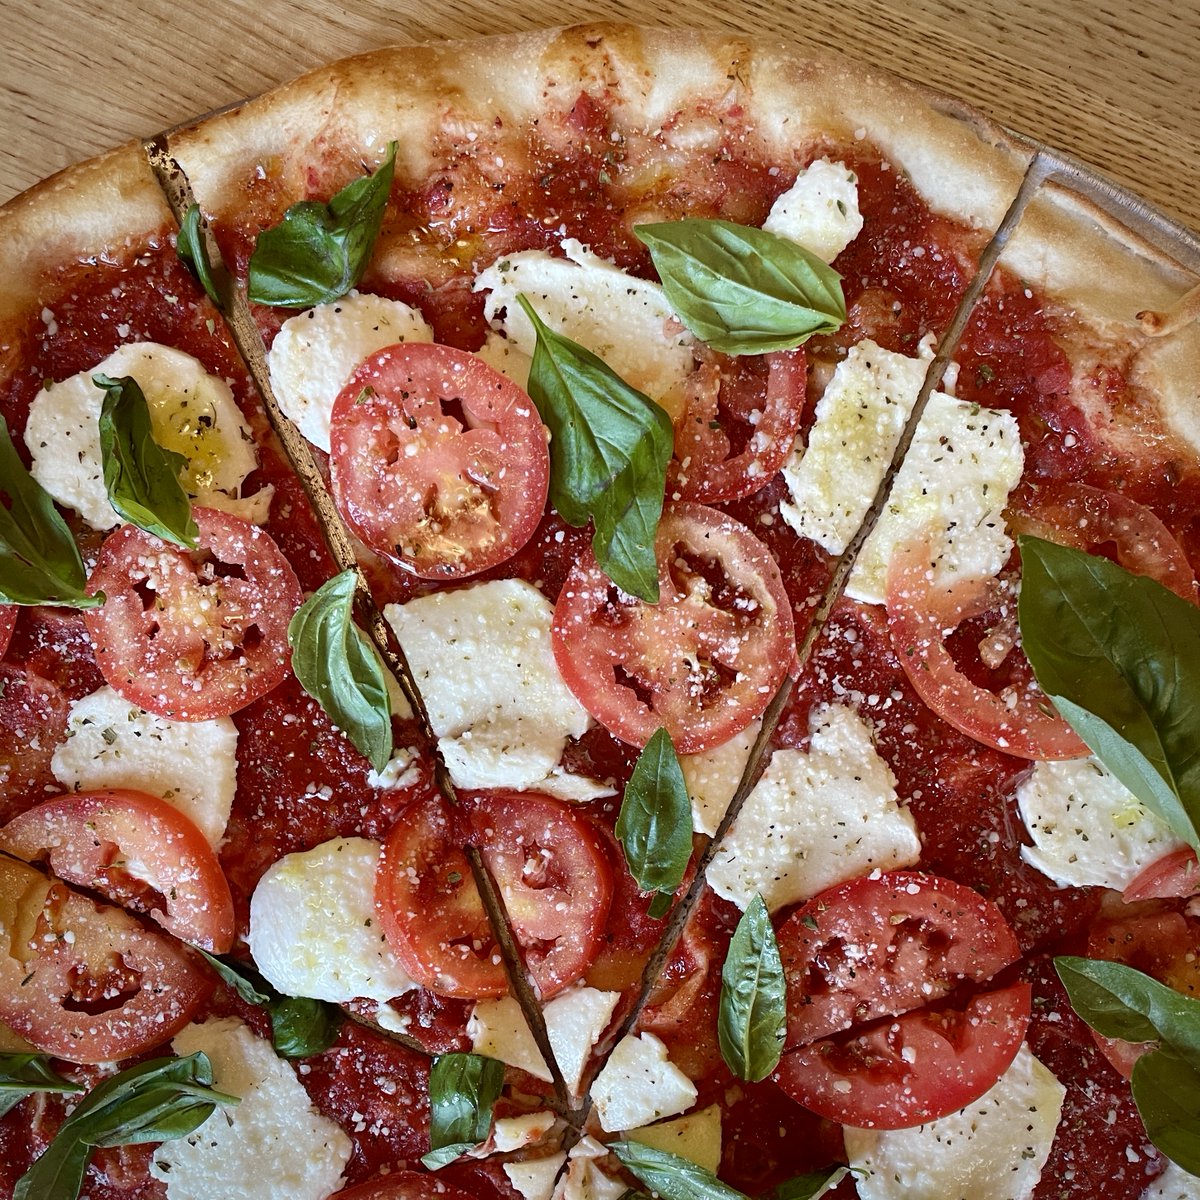 Happy #FreePizzaFriday! We're celebrating our FMTB (Fresh Mozzarella, Tomato, and Basil) pizza being back with some free slices! Retweet this tweet and you're entered to win 8 free slices! We'll pick one lucky winner on Monday!